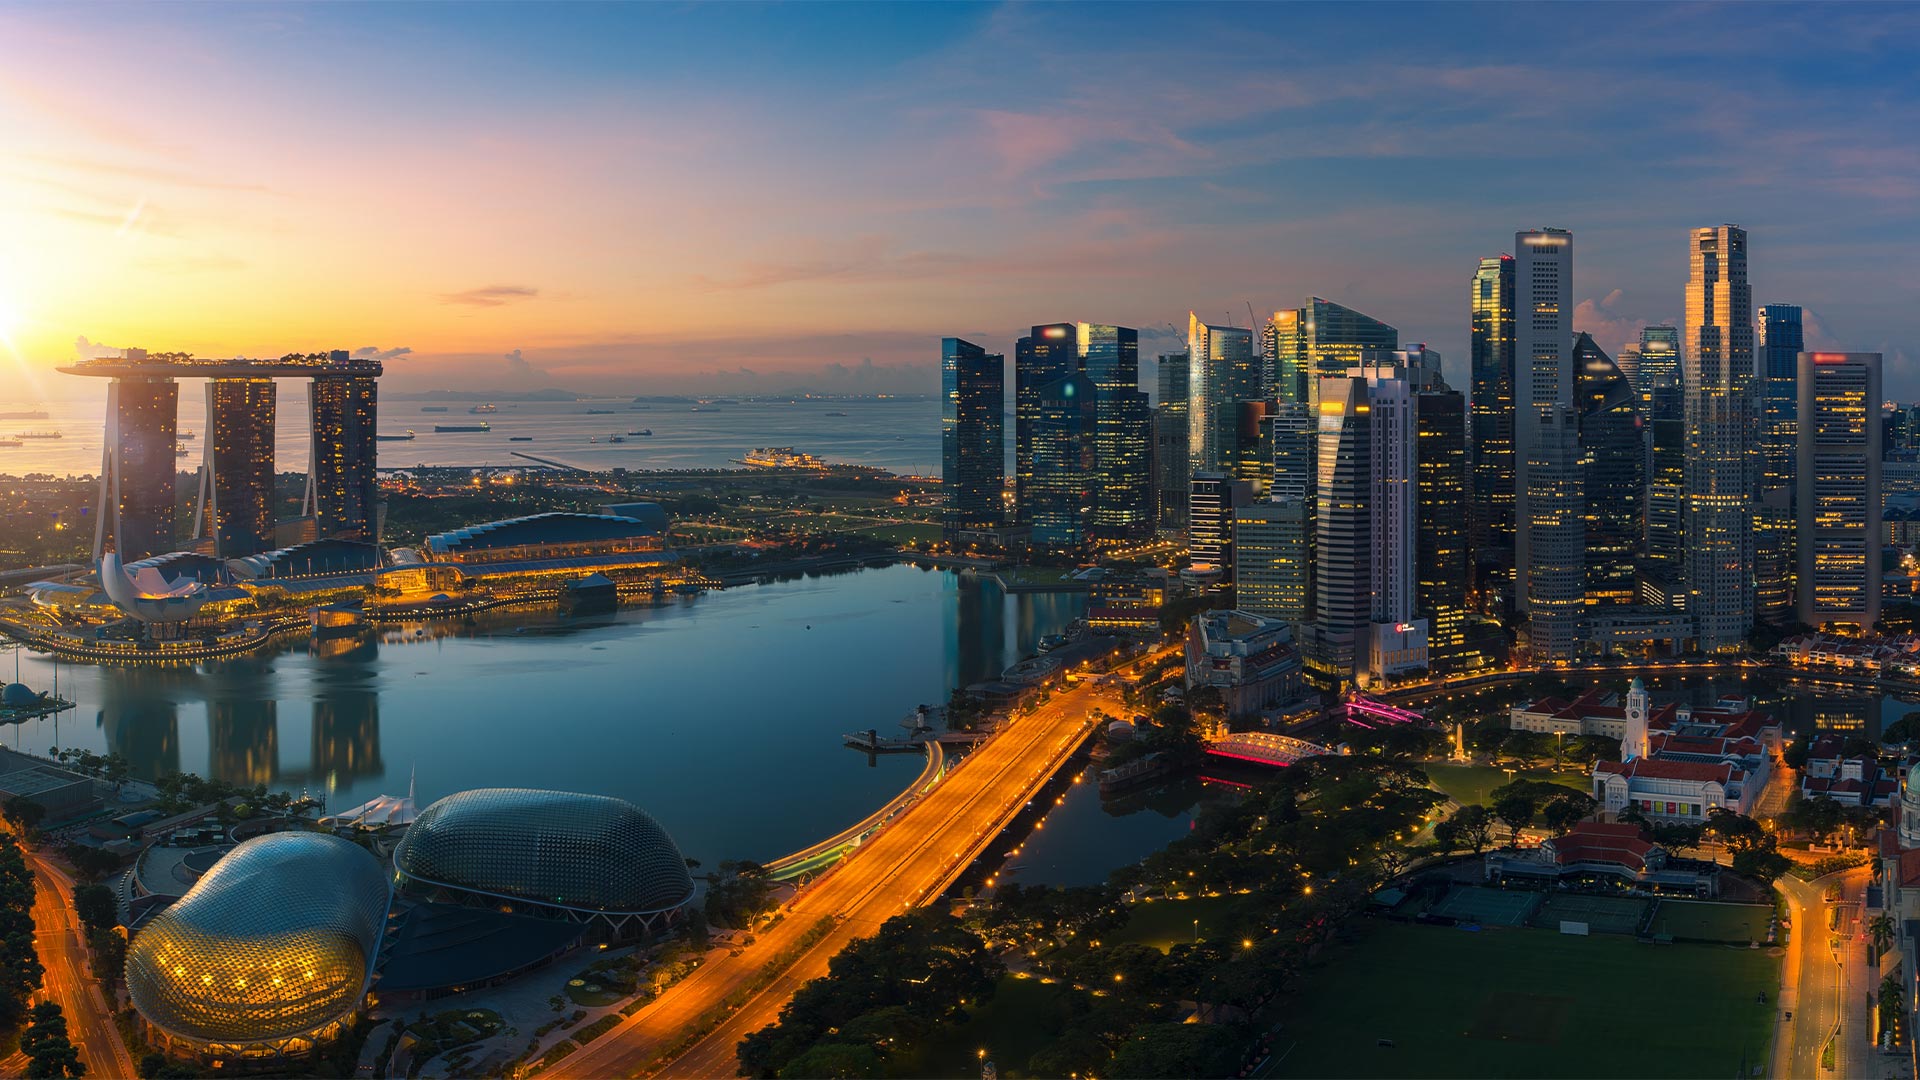 Marina Bay Sands, Esplanade and other attractions filled with things to do in Singapore